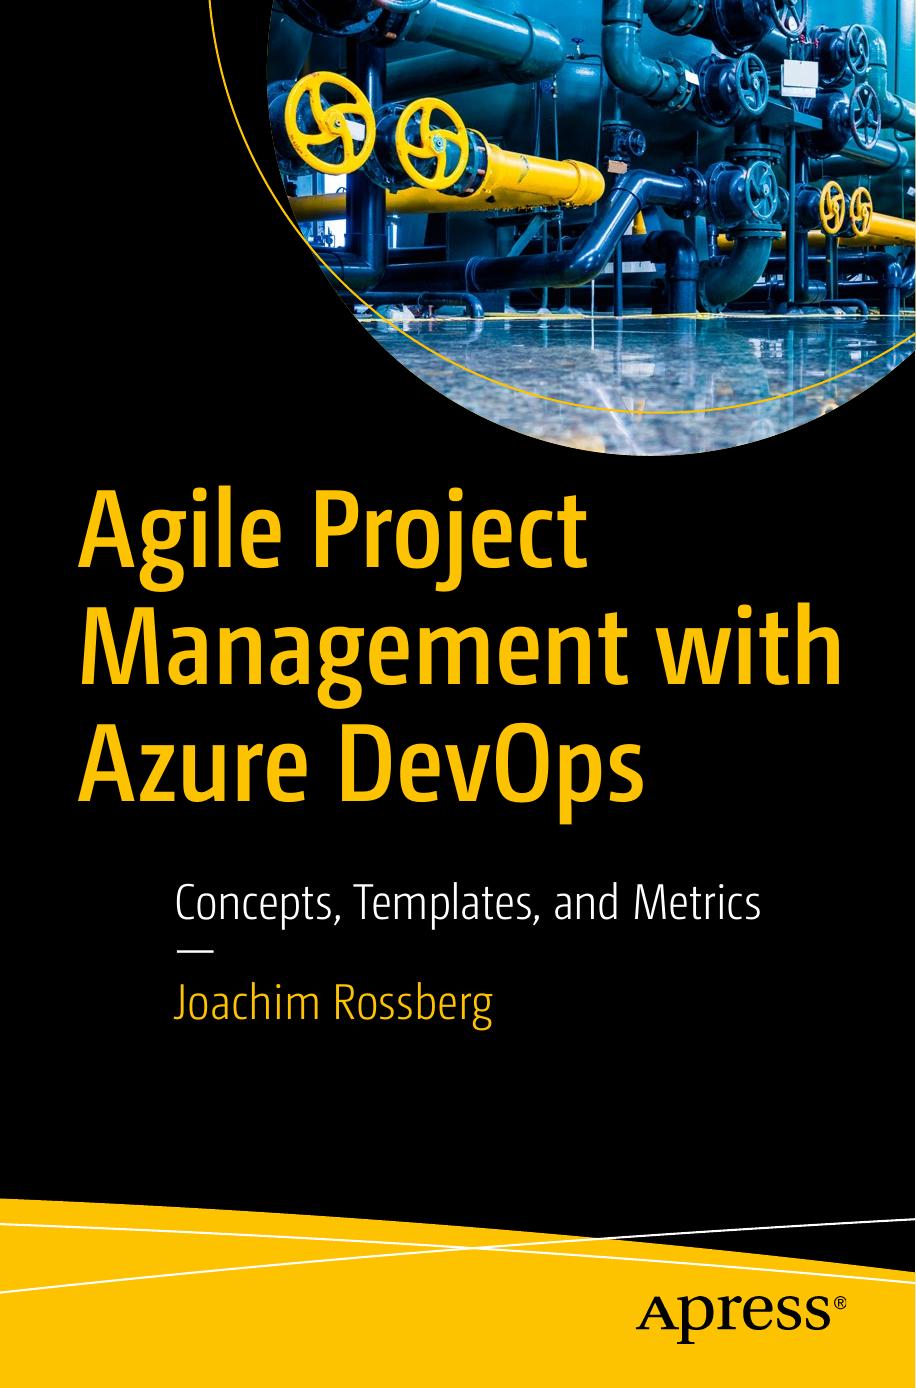 Agile Project Management with Azure DevOps  Concepts, Templates, and Metrics  2019